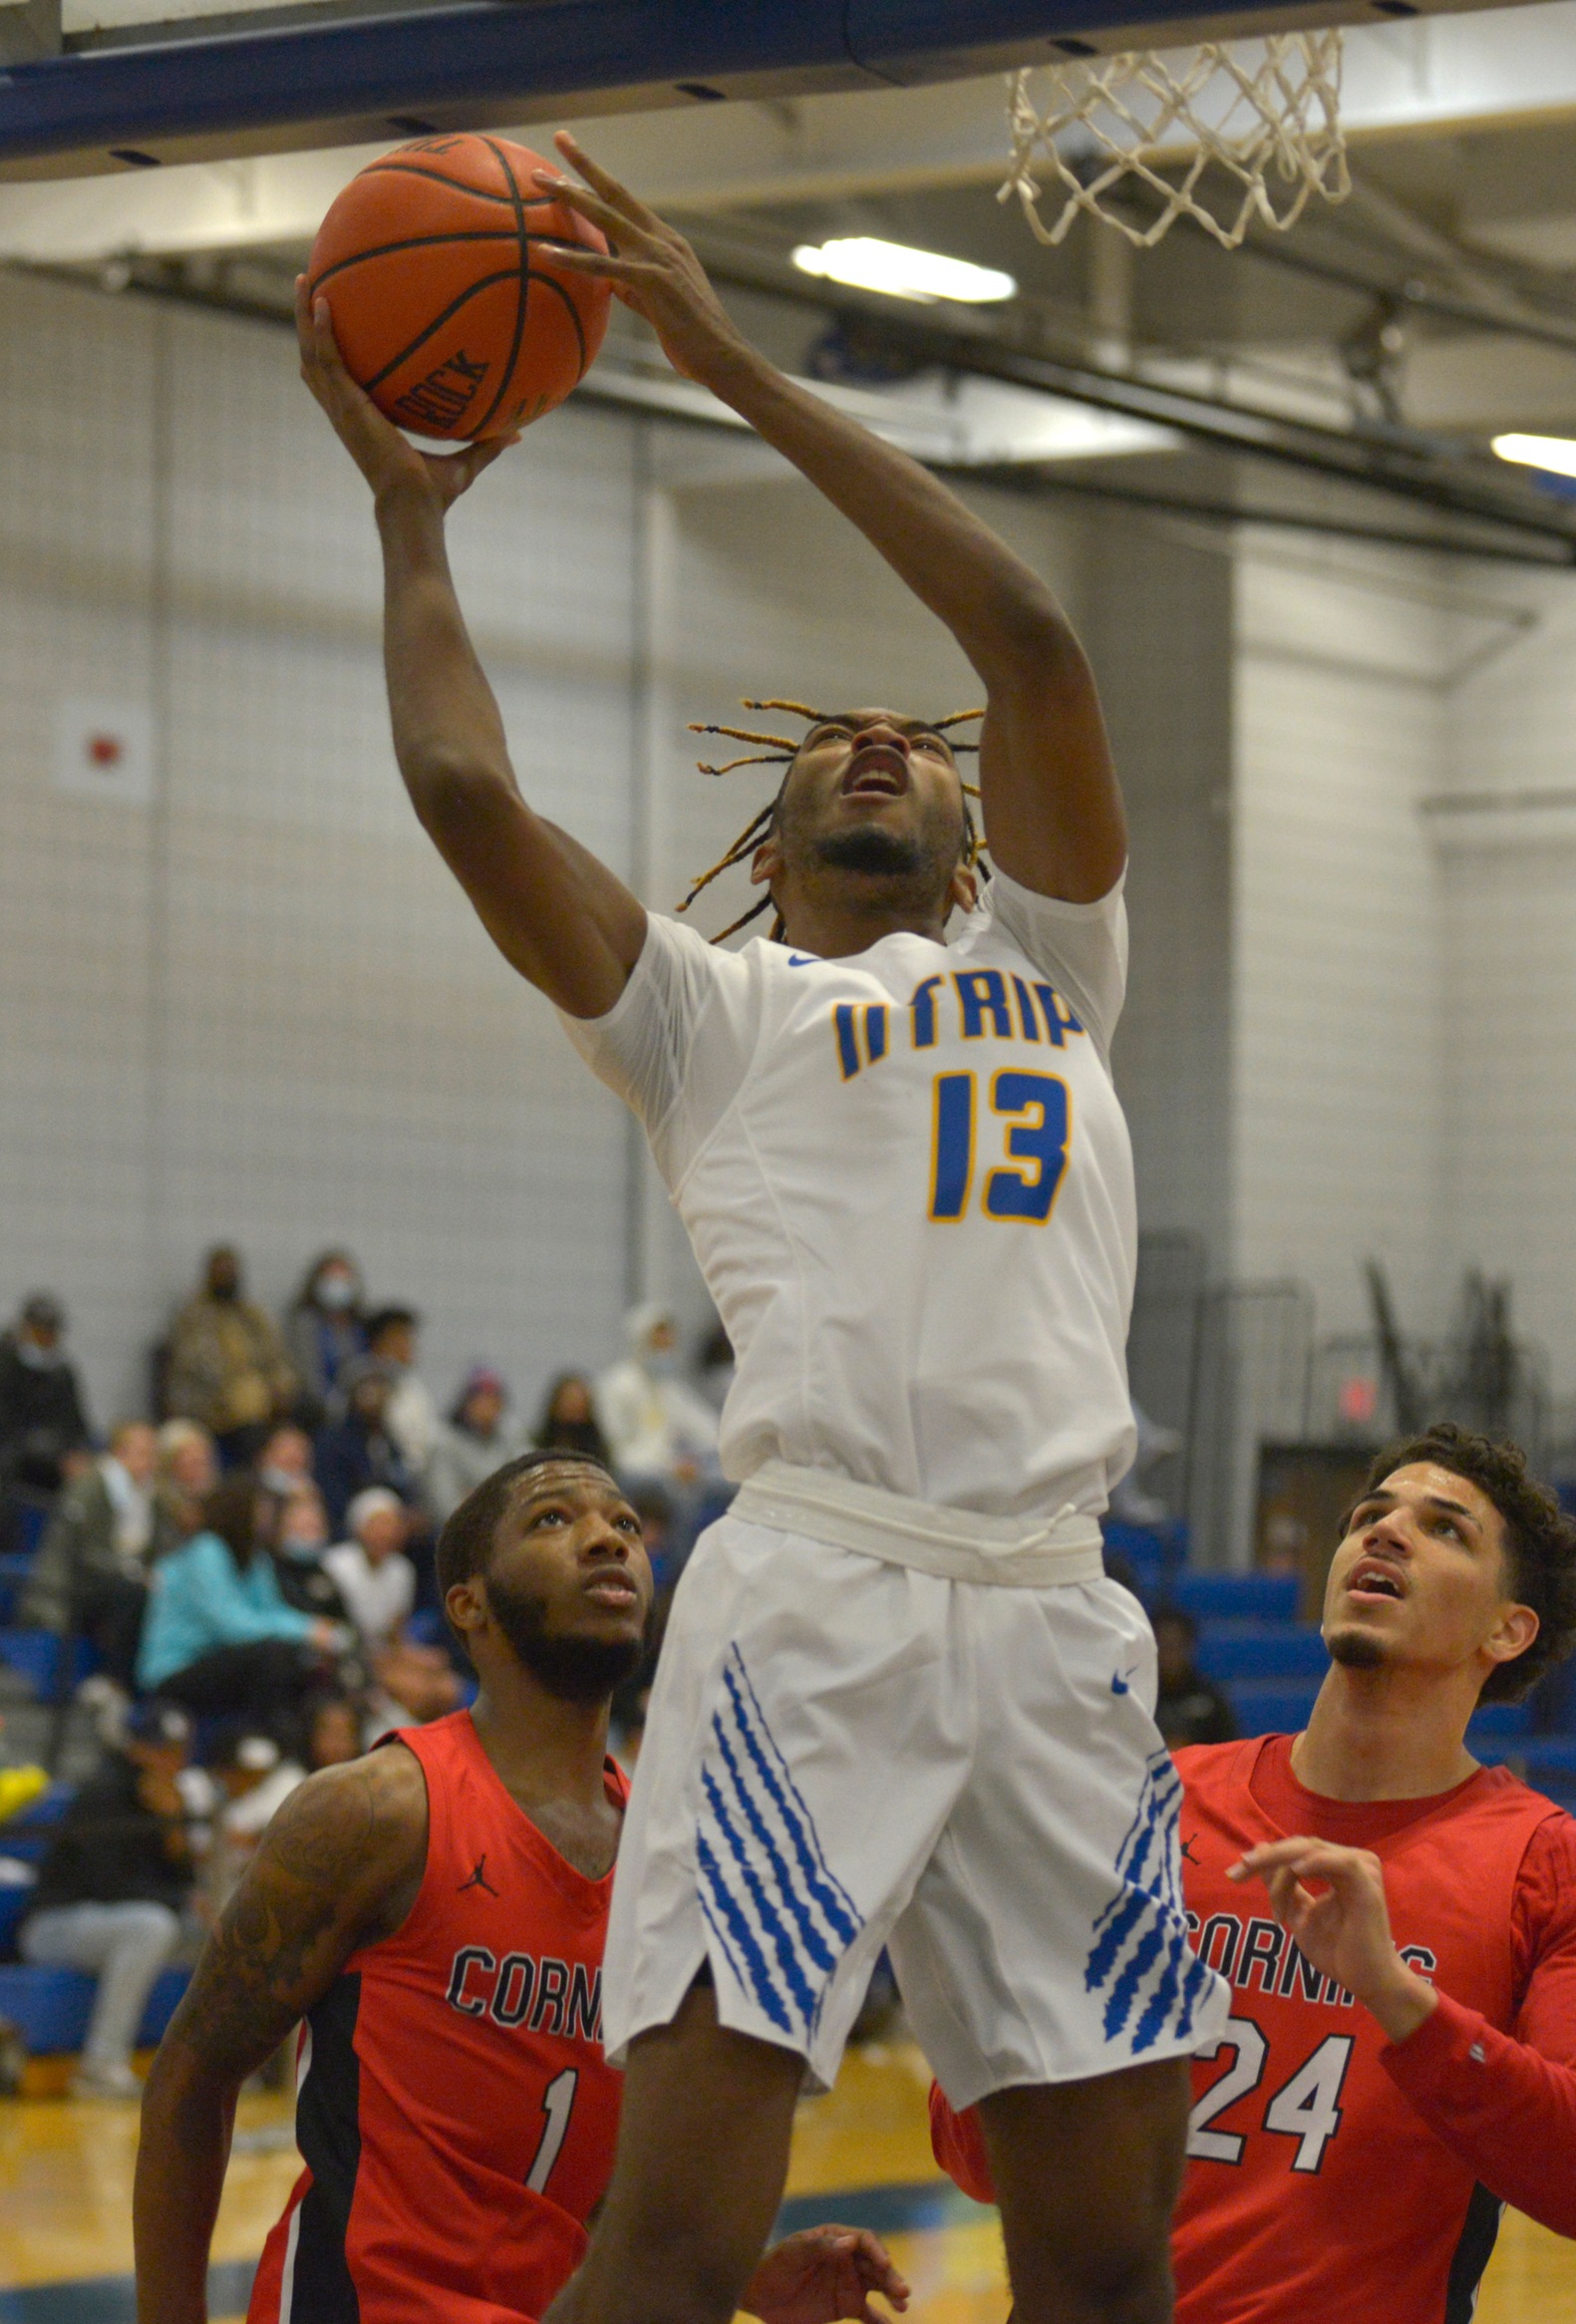 NCCC suffers loss at Herkimer